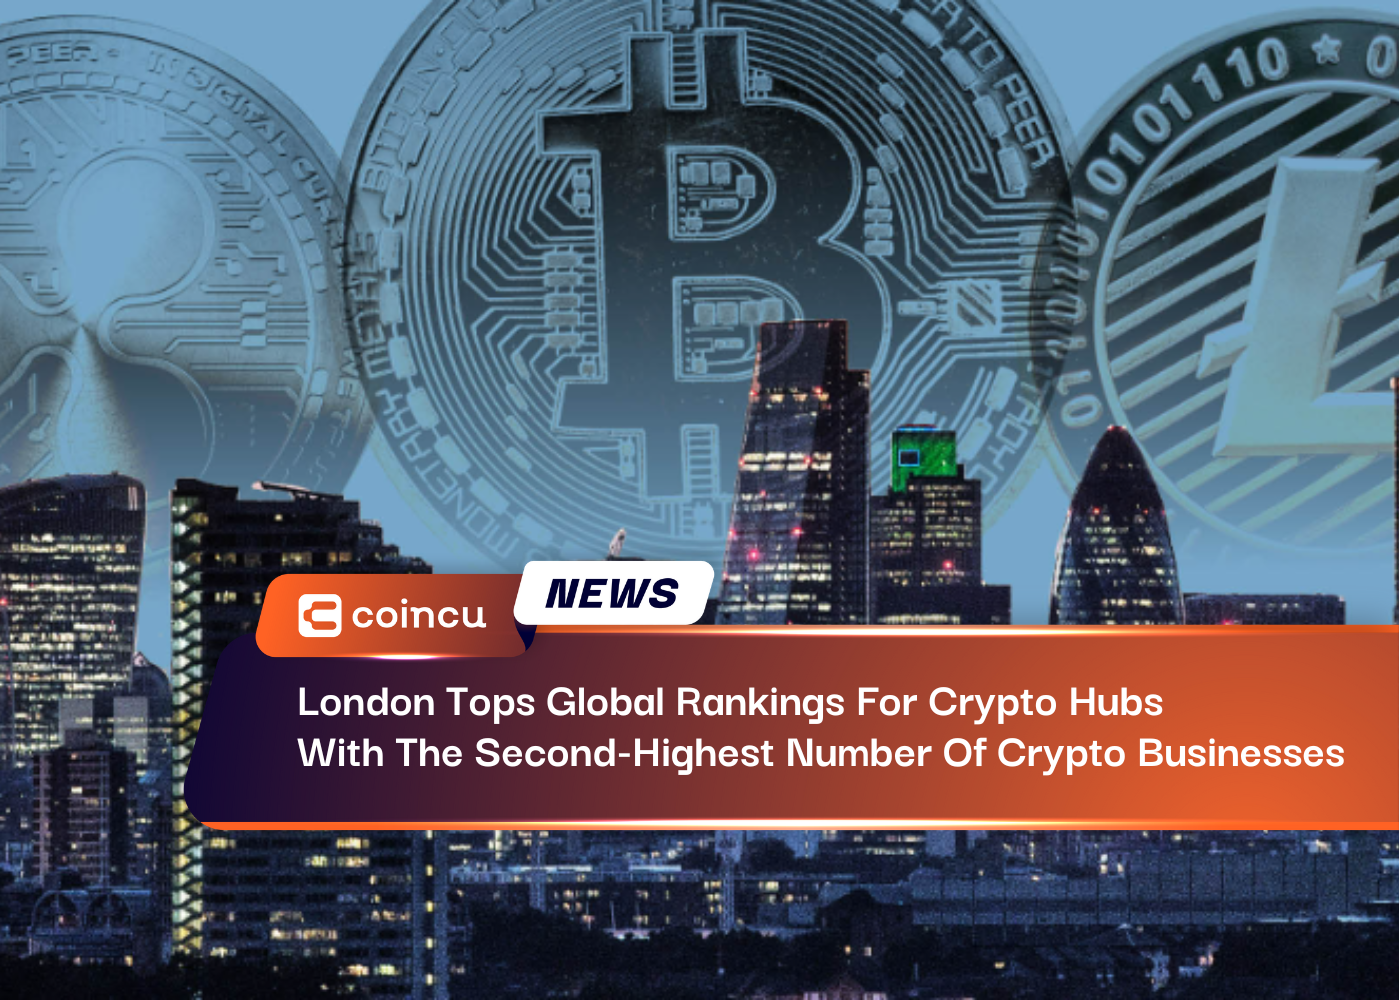 London Tops Global Rankings For Crypto Hubs